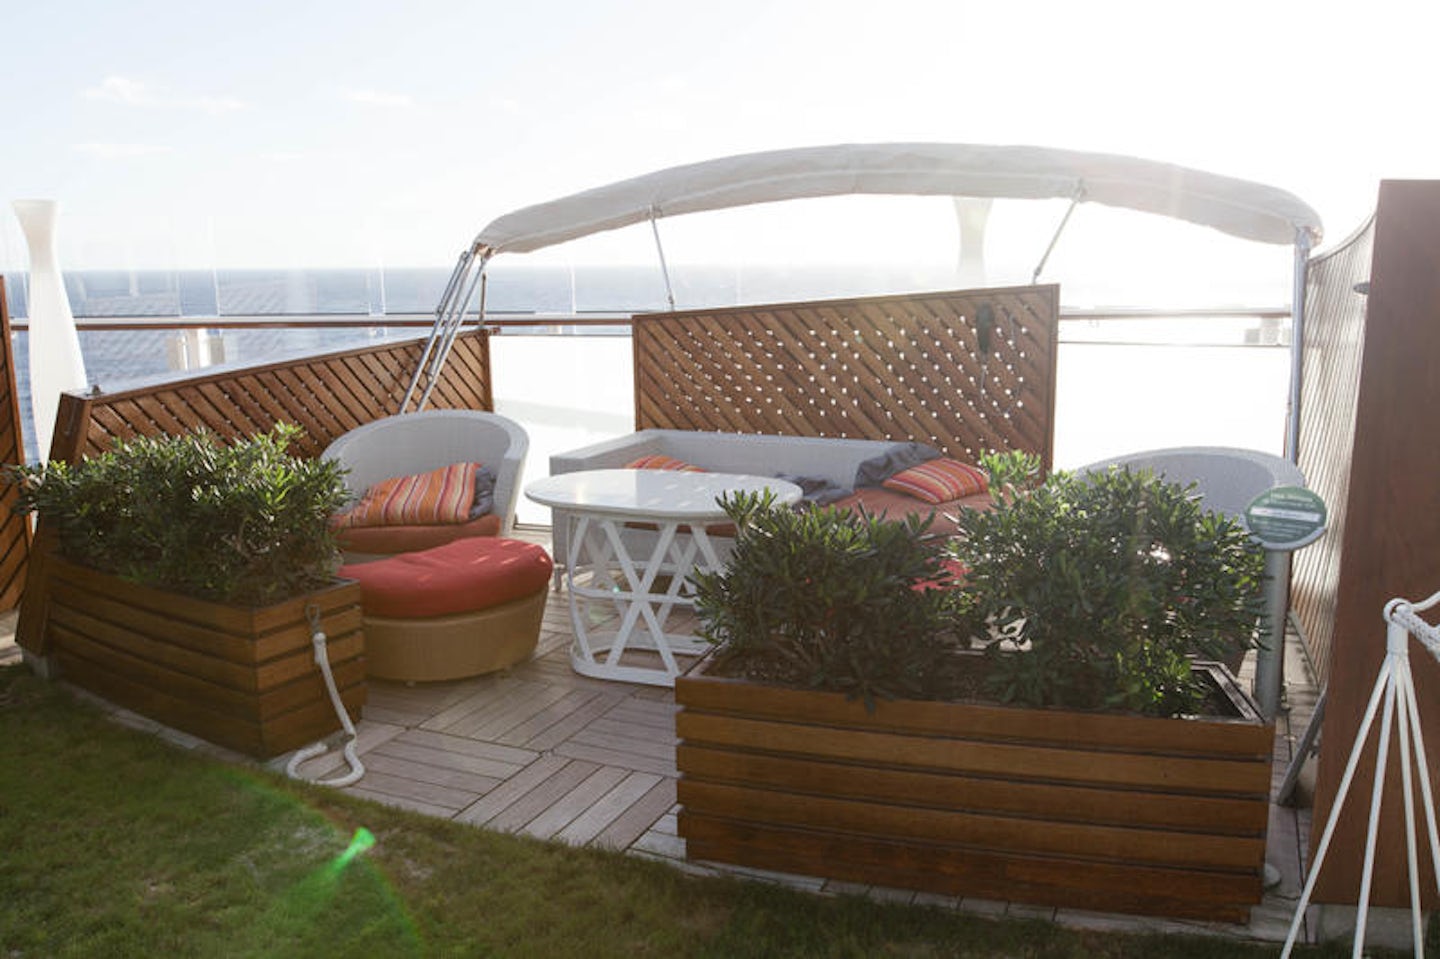 The Lawn Club on Celebrity Silhouette